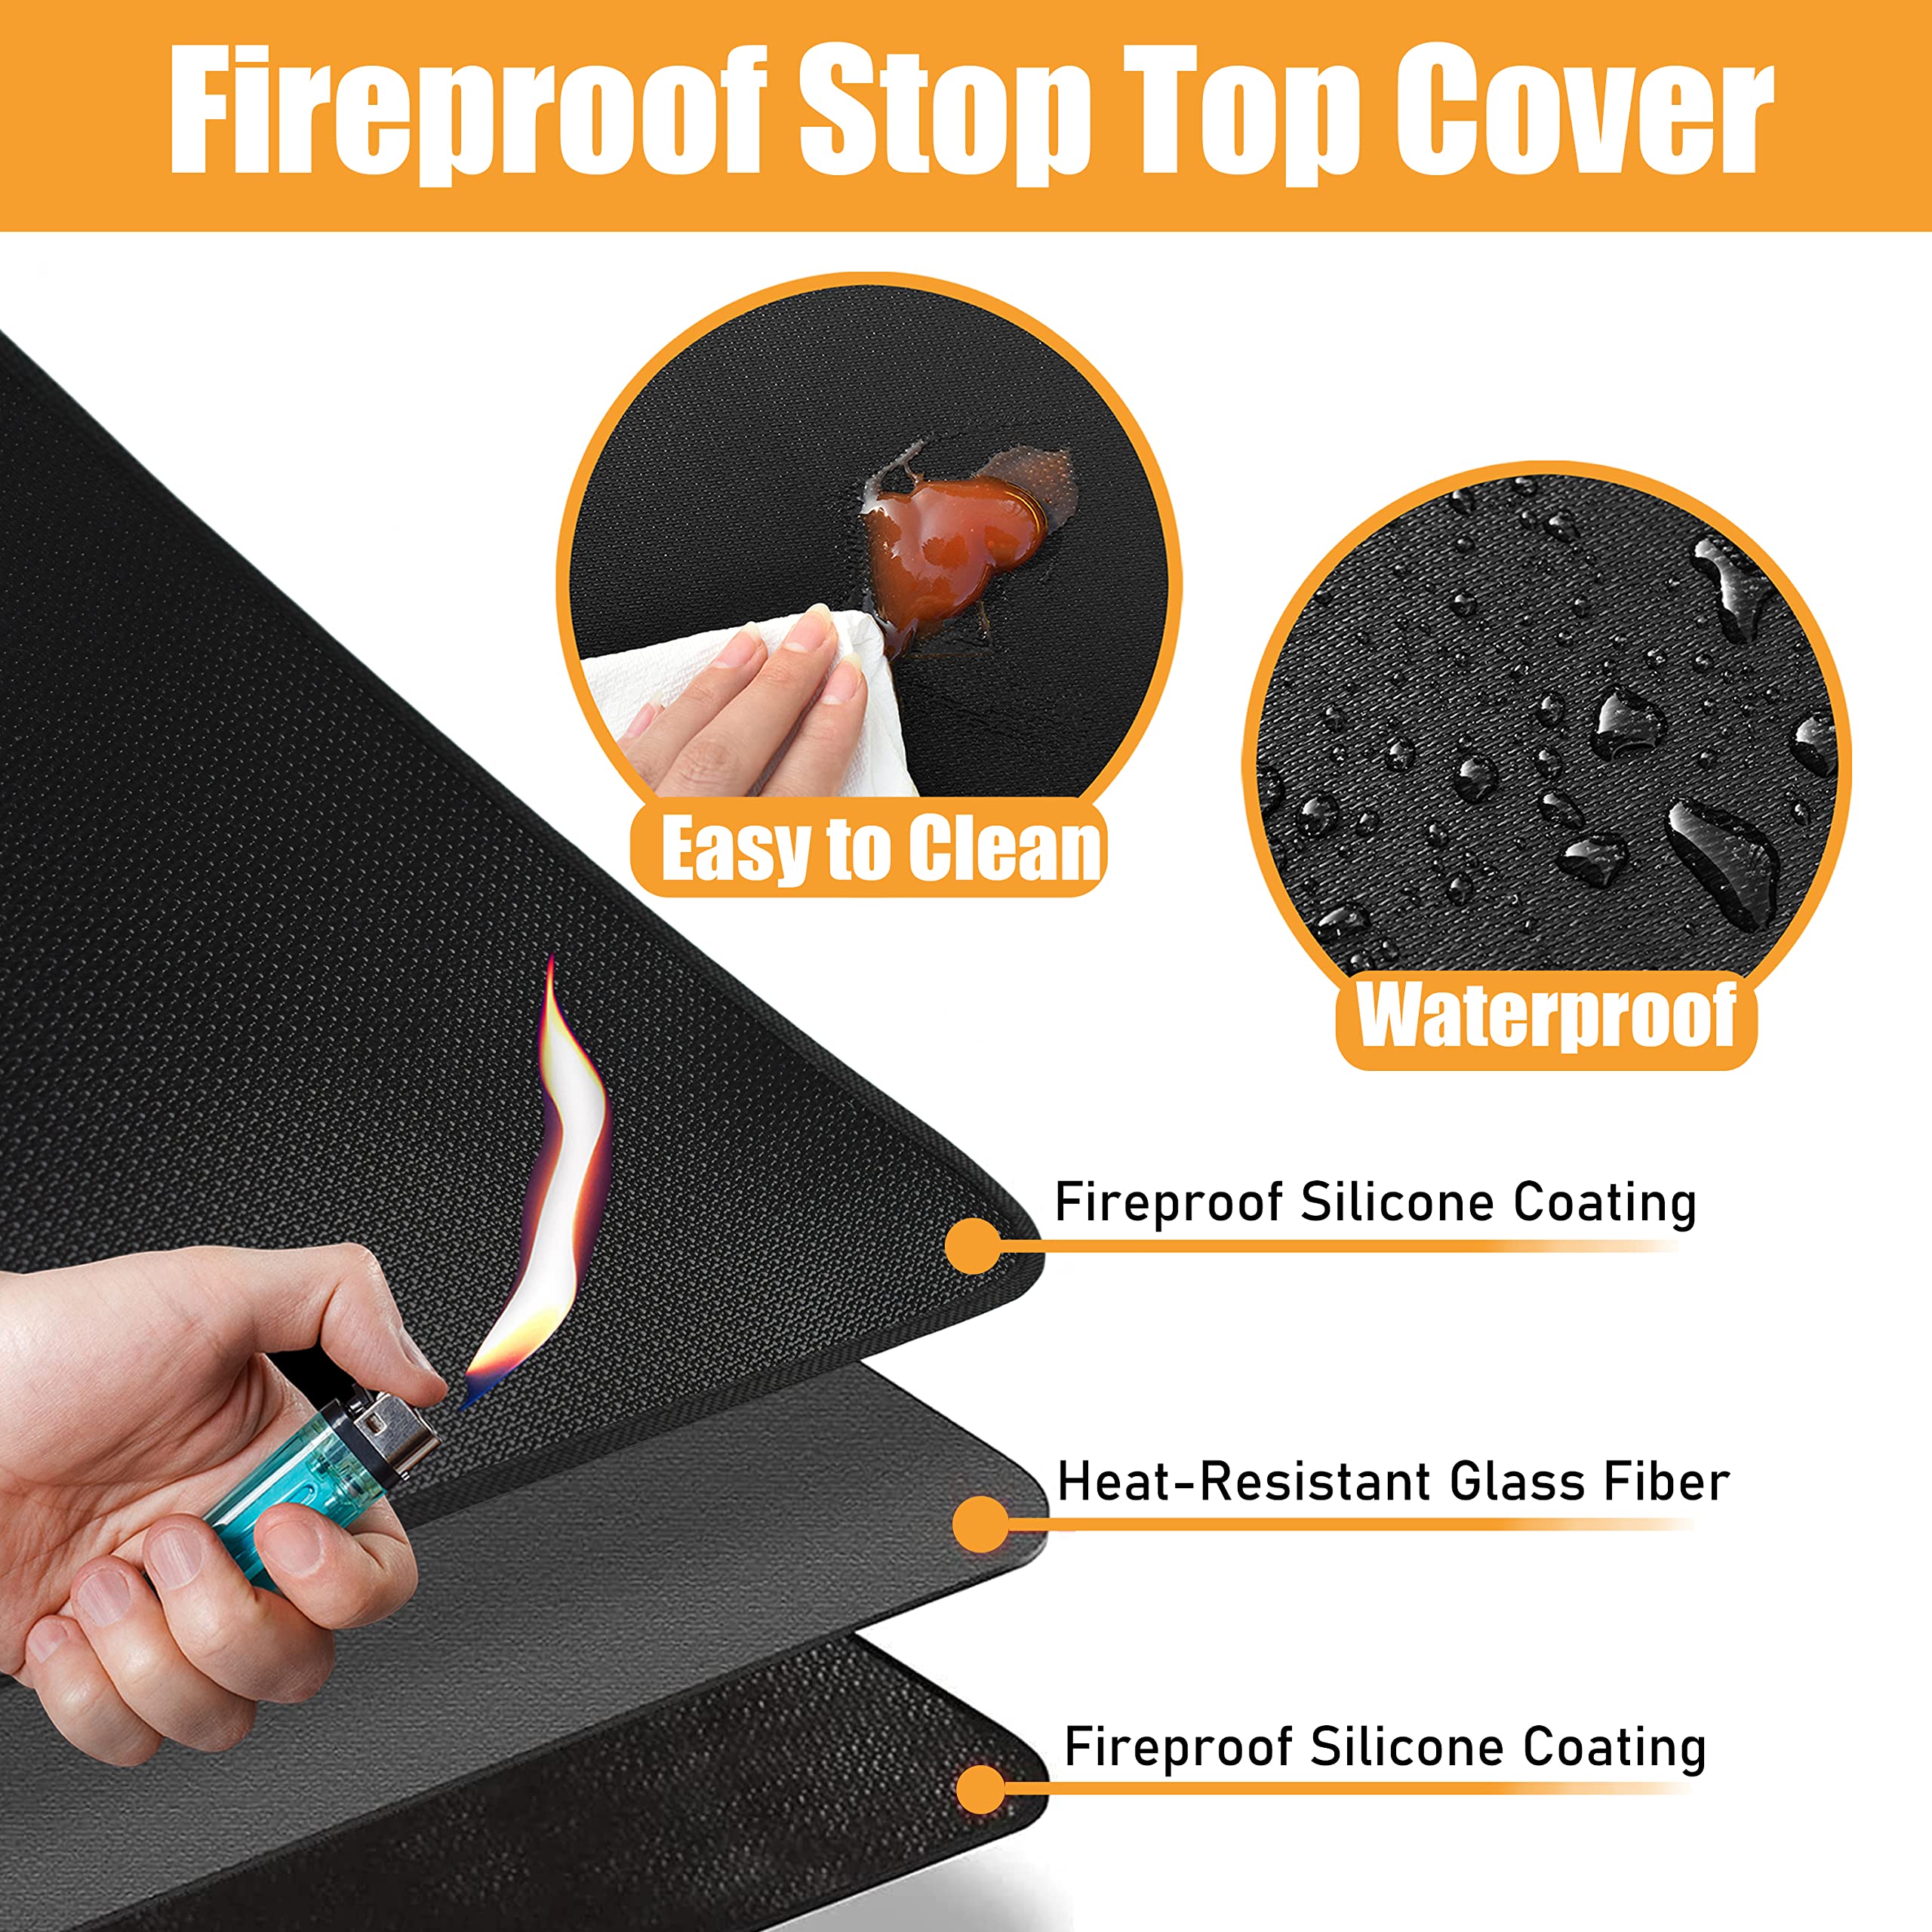 Amerbro Fireproof Stove Top Cover for Electric Stove - 21×29.5 inch Waterproof Electric Stove Cover - Glass Stove Top Cover - Glass Stove Top Protector for Prevent Scratches and Dust, 0.6mm Thin